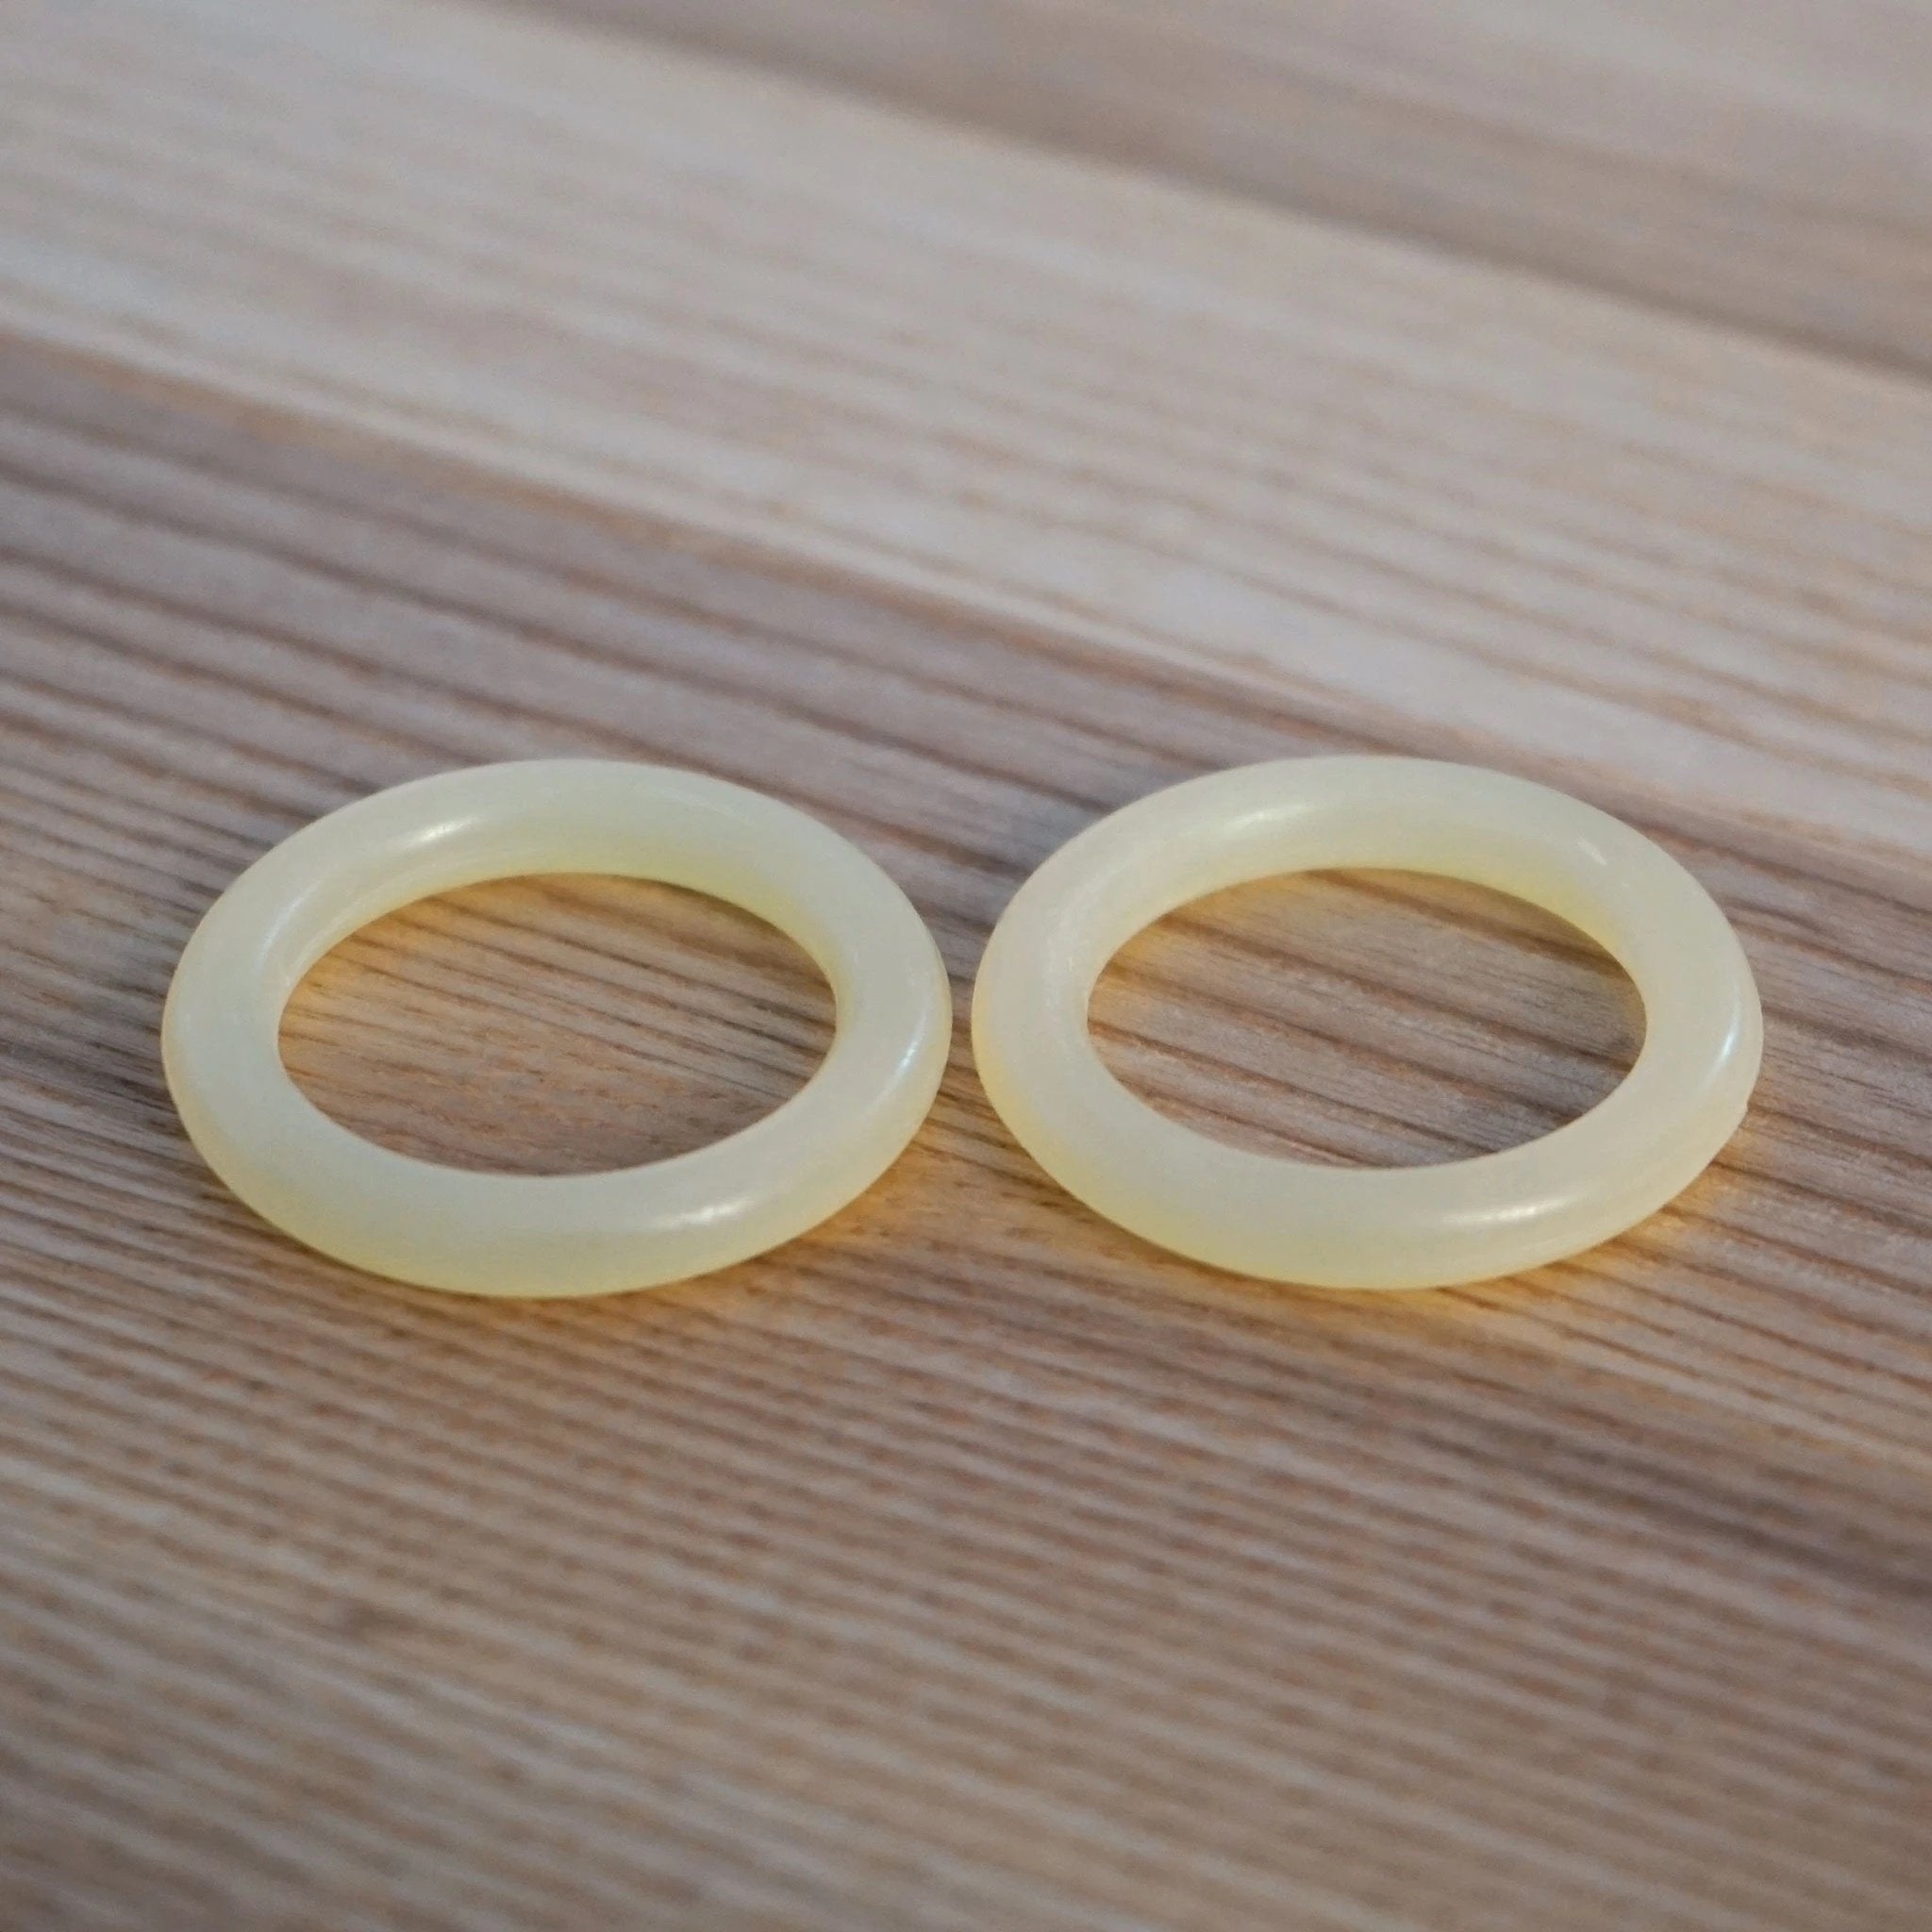 Jessem, M0307-PACK Replacement O-Rings for Clear-Cut Stock Guides Pa